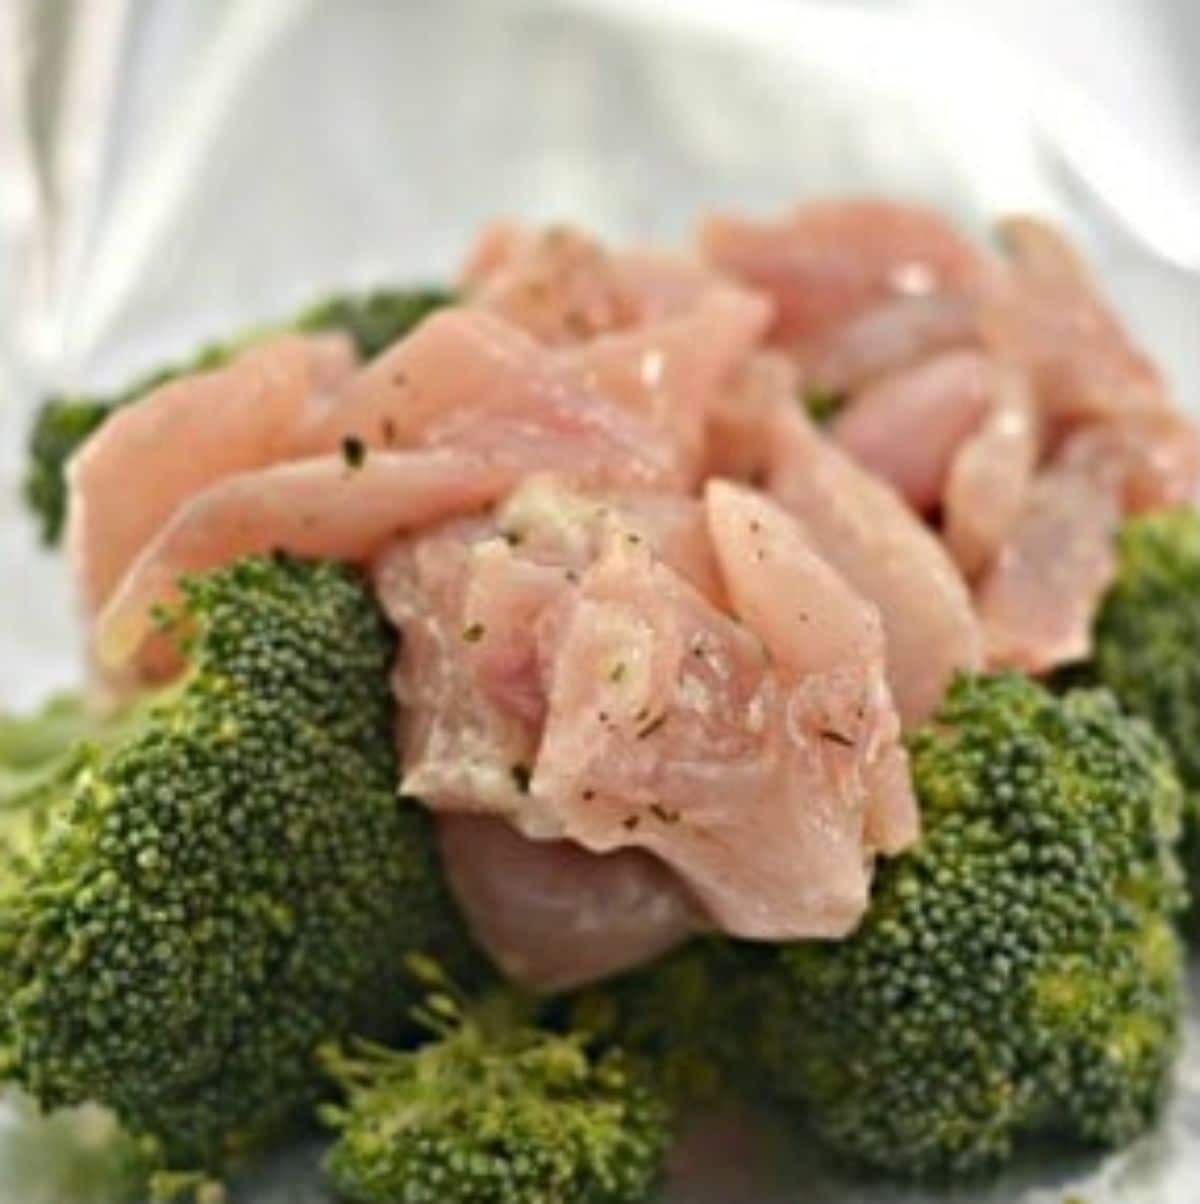 the chicken is added on top of the broccoli.